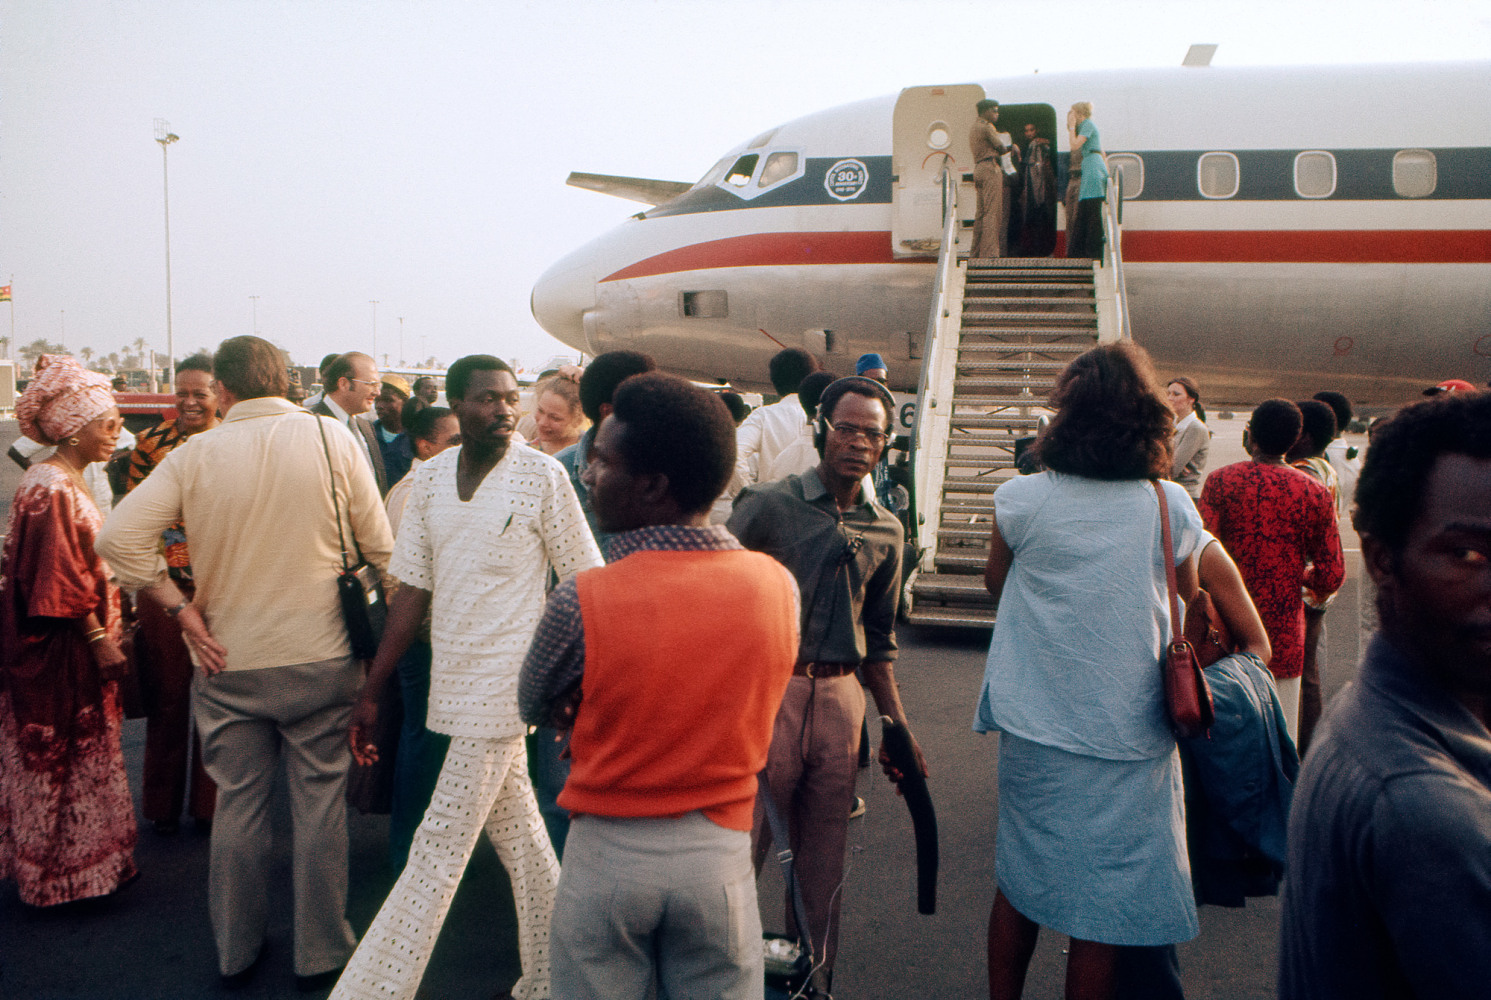 Roy Lewis (b. 1937)
U.S.A. Participants &amp;quot;Arrive at Lagos Airport&amp;quot;, 1977
Archival inkjet print on Simply Elegant Gold Fibre paper
Image: 13 3/4 x 20 inches (34.9 x 50.8 cm) Sheet: 17 x 22 inches (43.2 x 55.9 cm)
Framed: 18 5/8 &amp;times; 25 3/8 &amp;times; 1 1/2 inches (47.3 &amp;times; 64.5 &amp;times; 3.8 cm)
Edition of 5, printed 2023